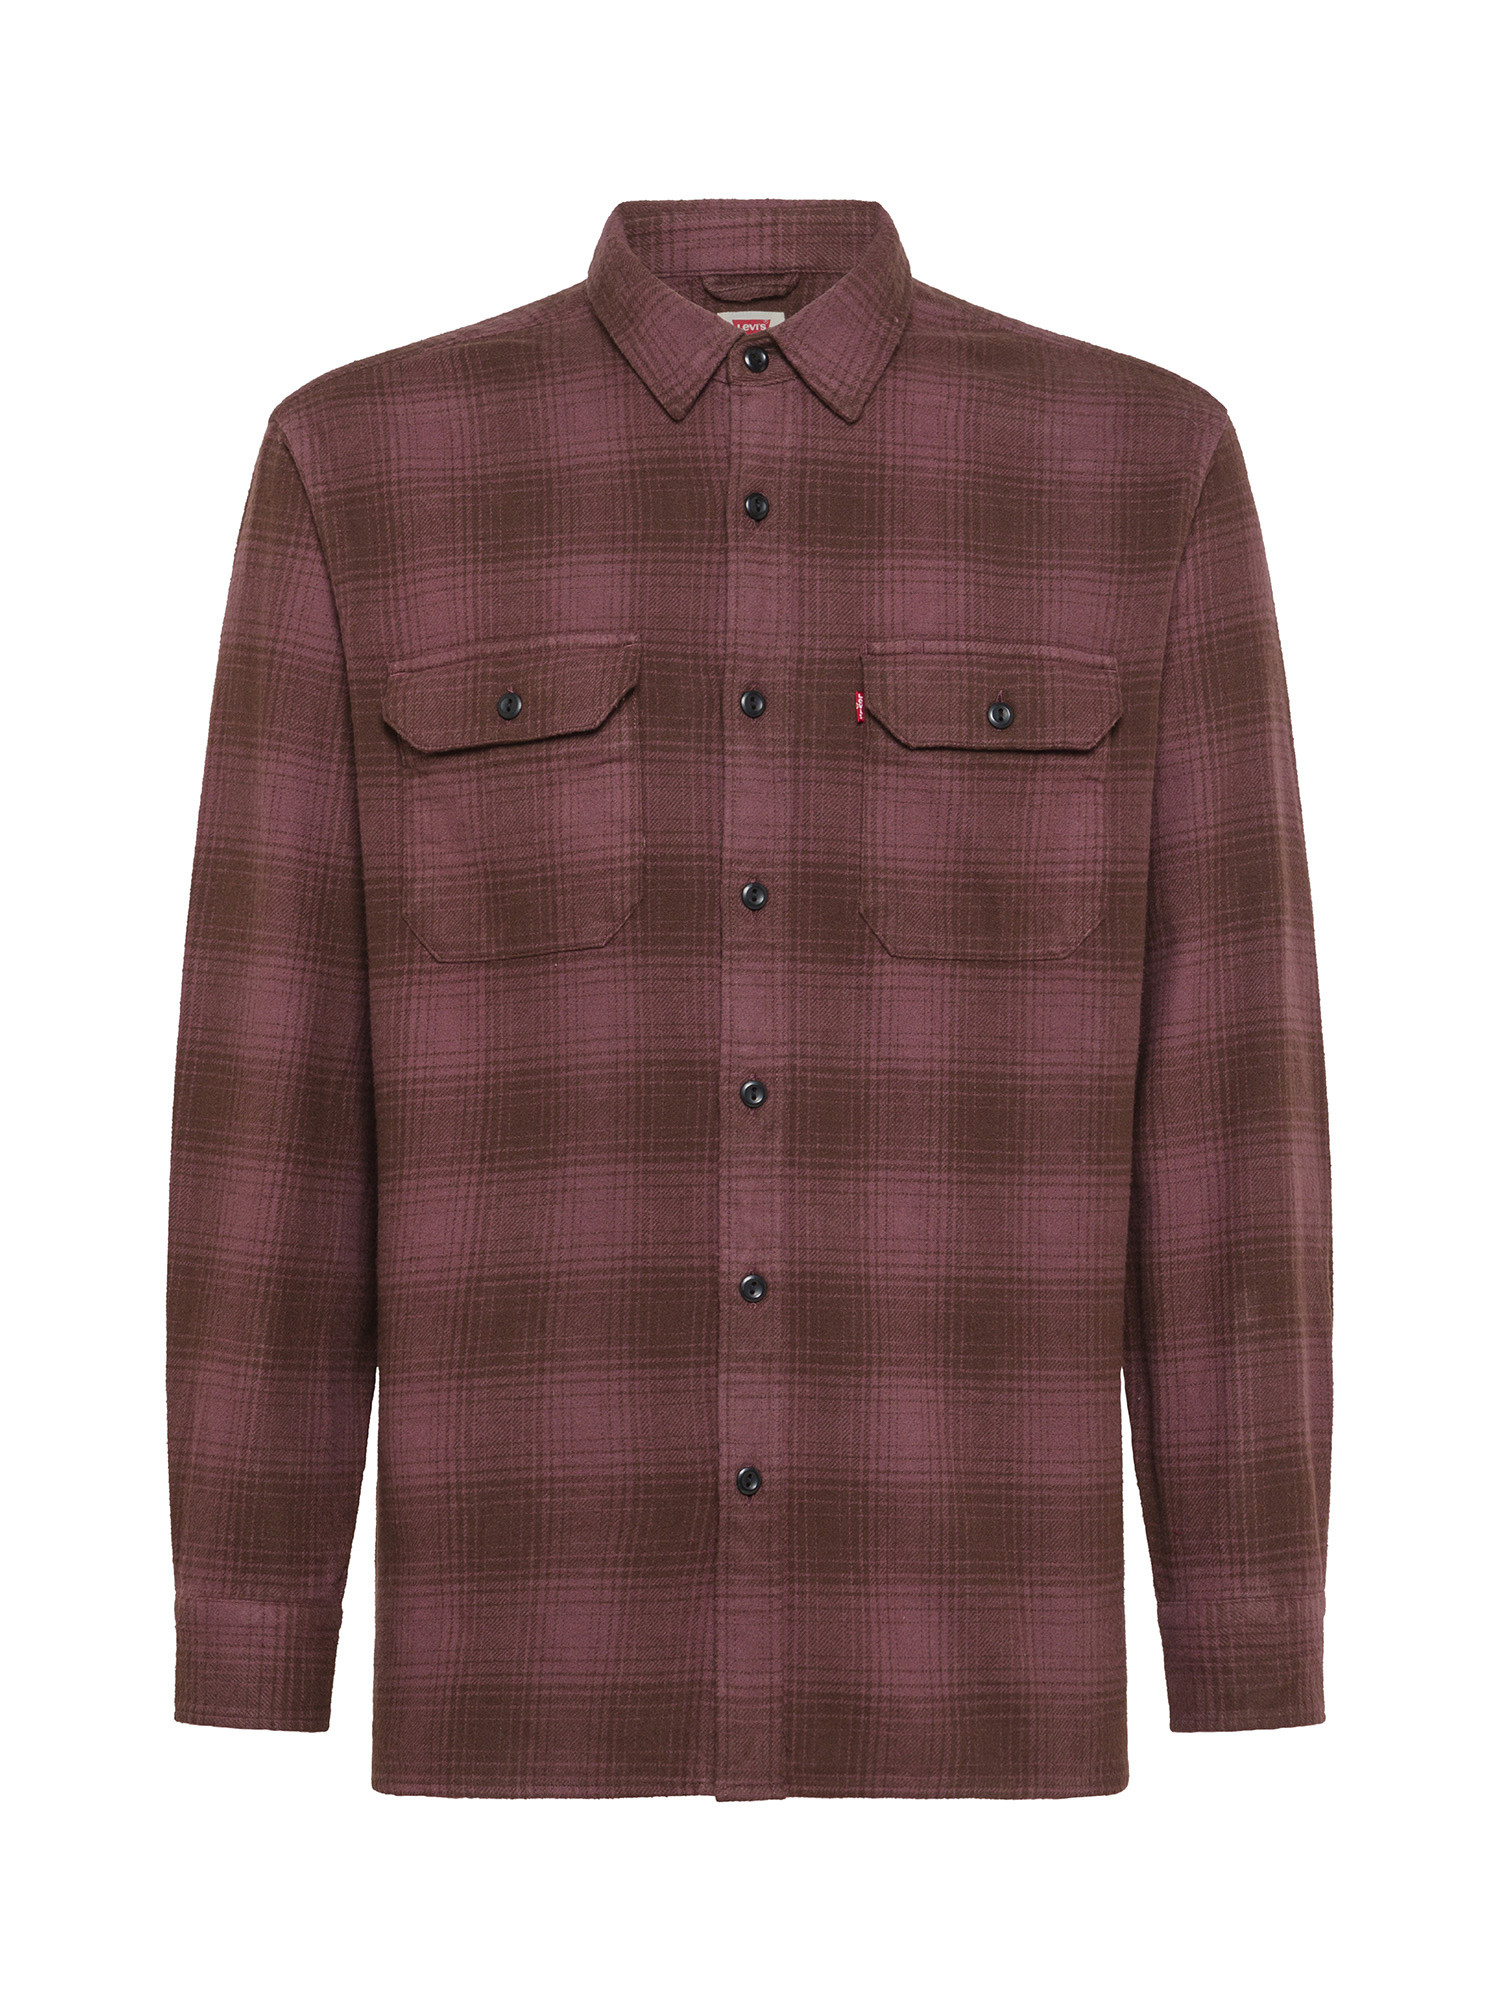 Levi's - Check shirt, Red Bordeaux, large image number 0